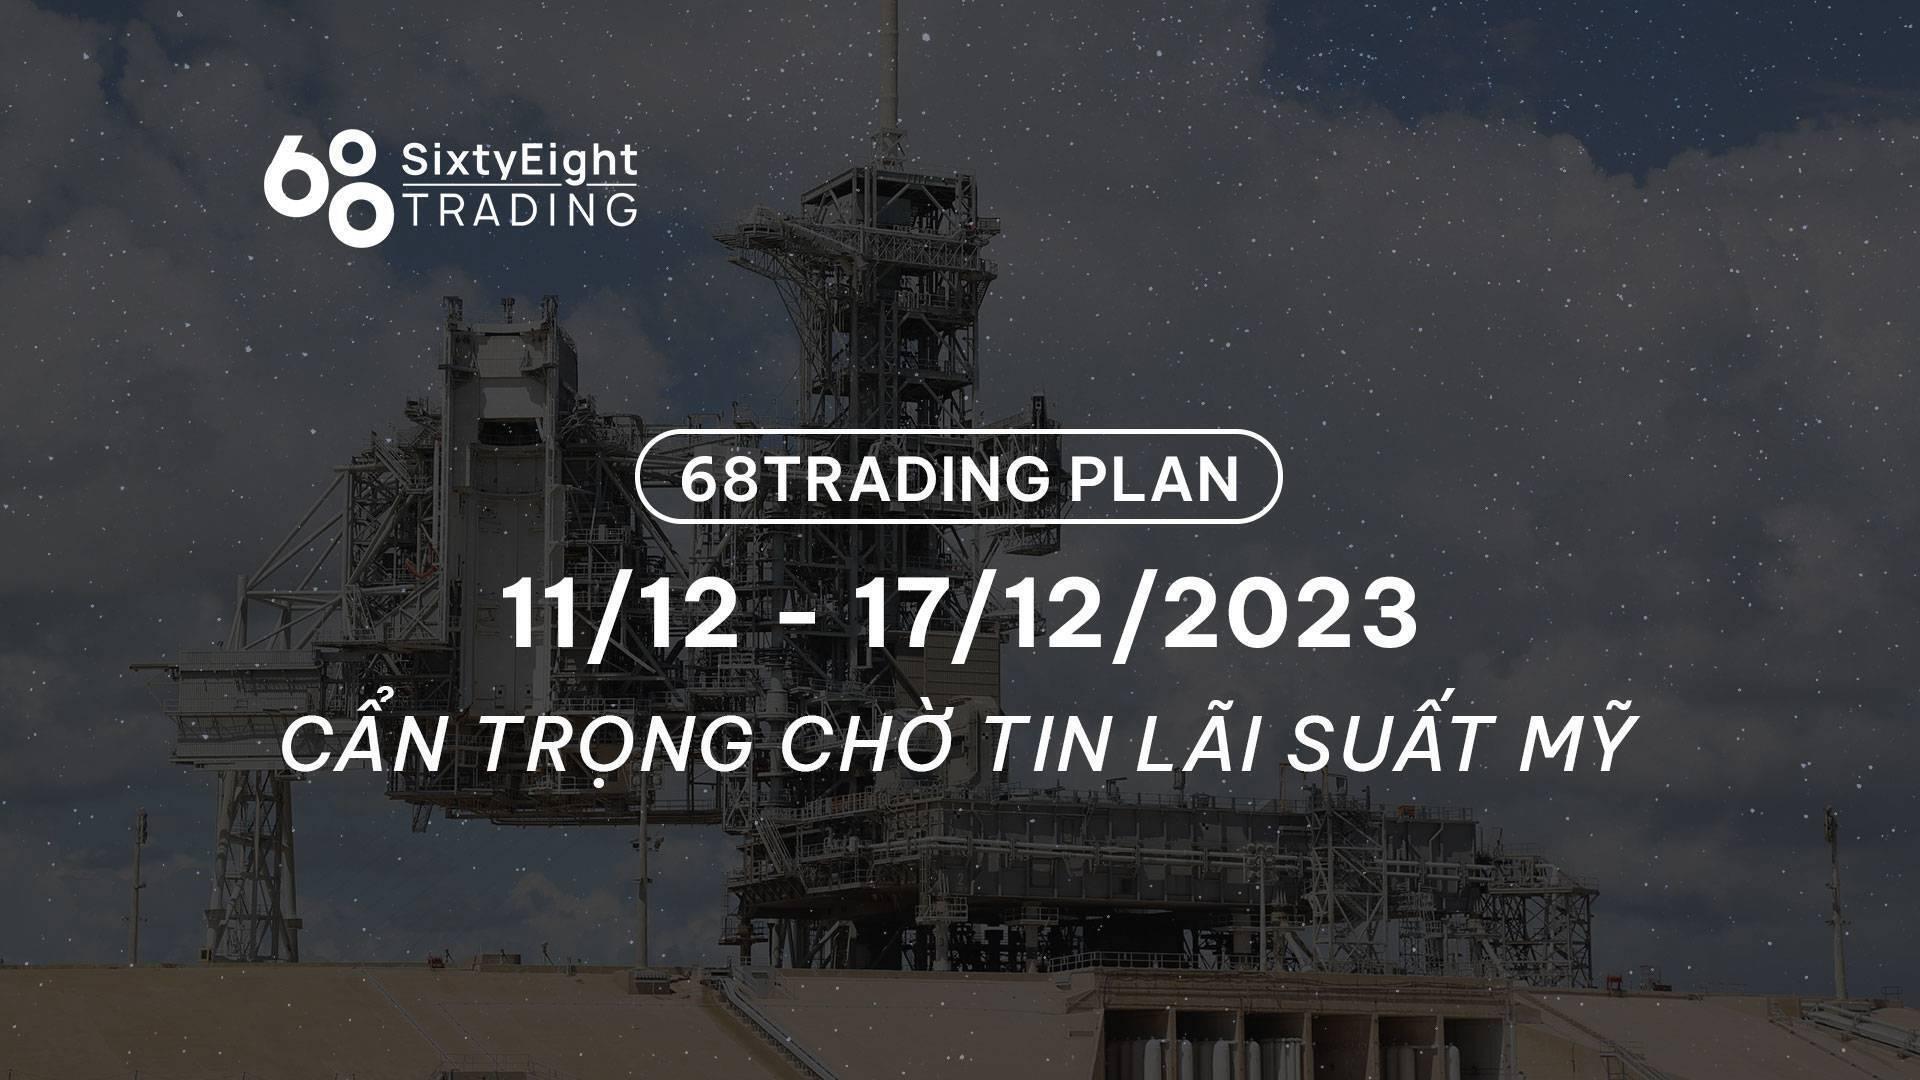 68-trading-plan-1112-17122023-can-trong-cho-tin-lai-suat-my